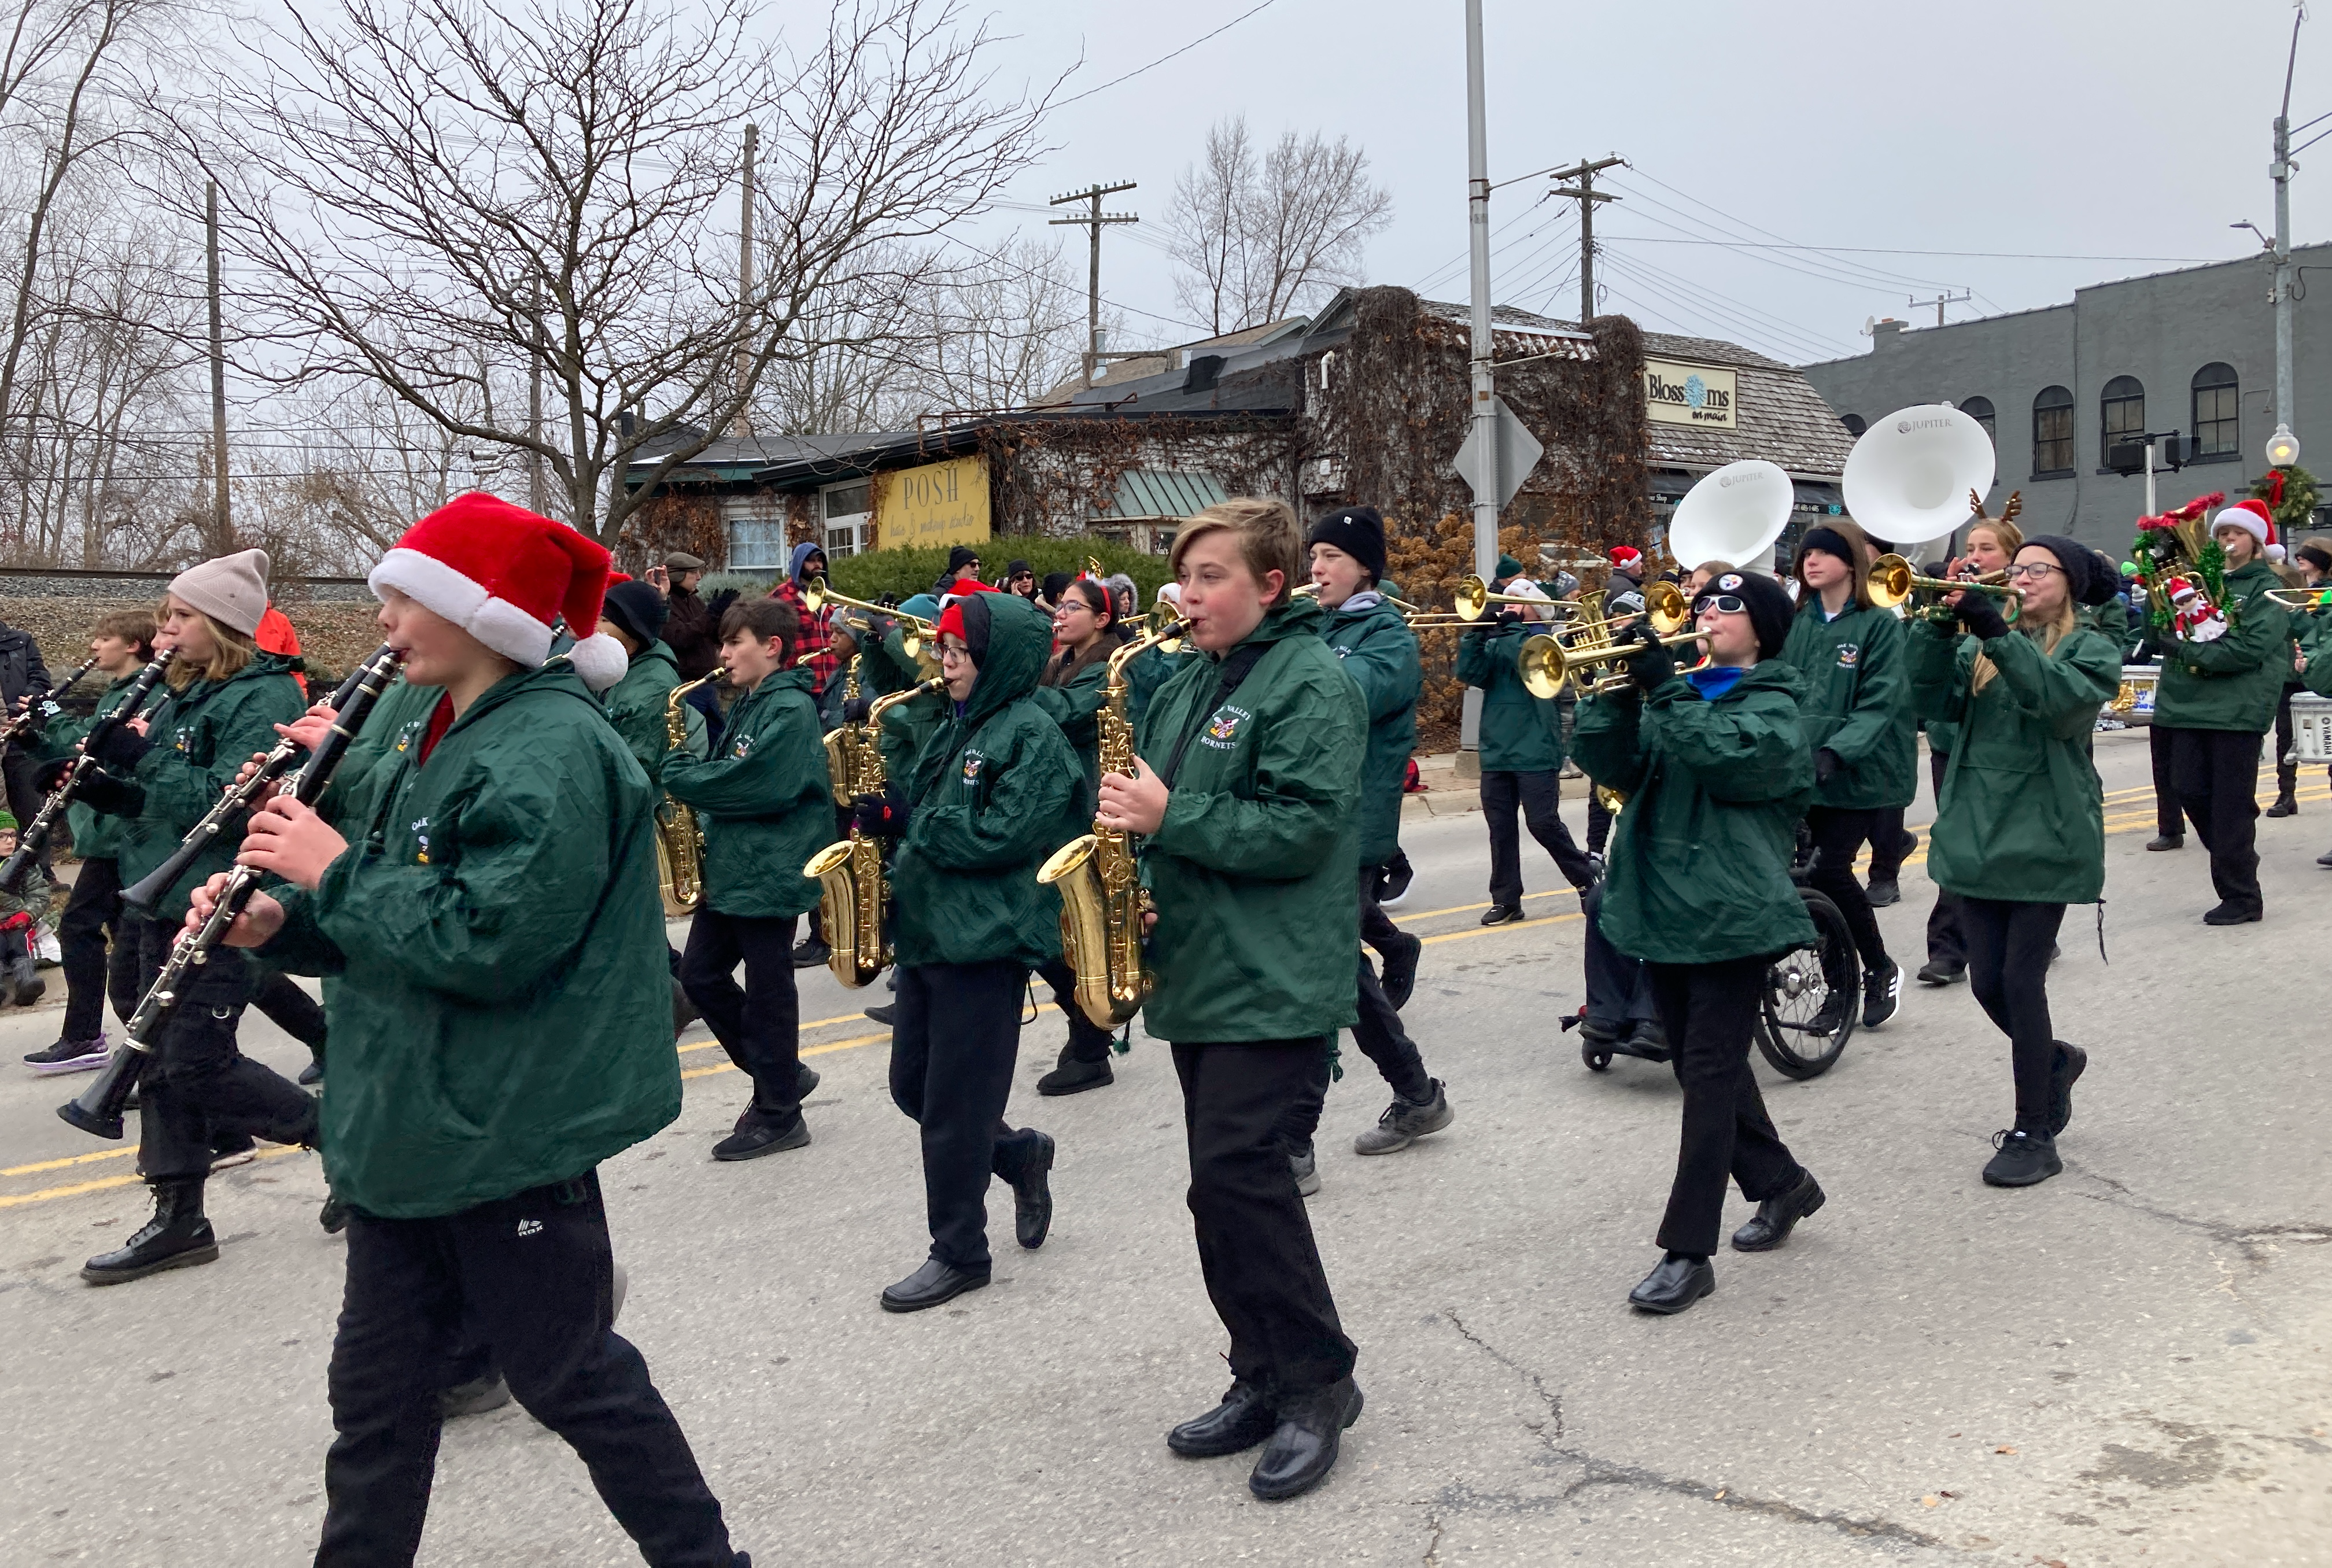 Marching Band in Milford Parade